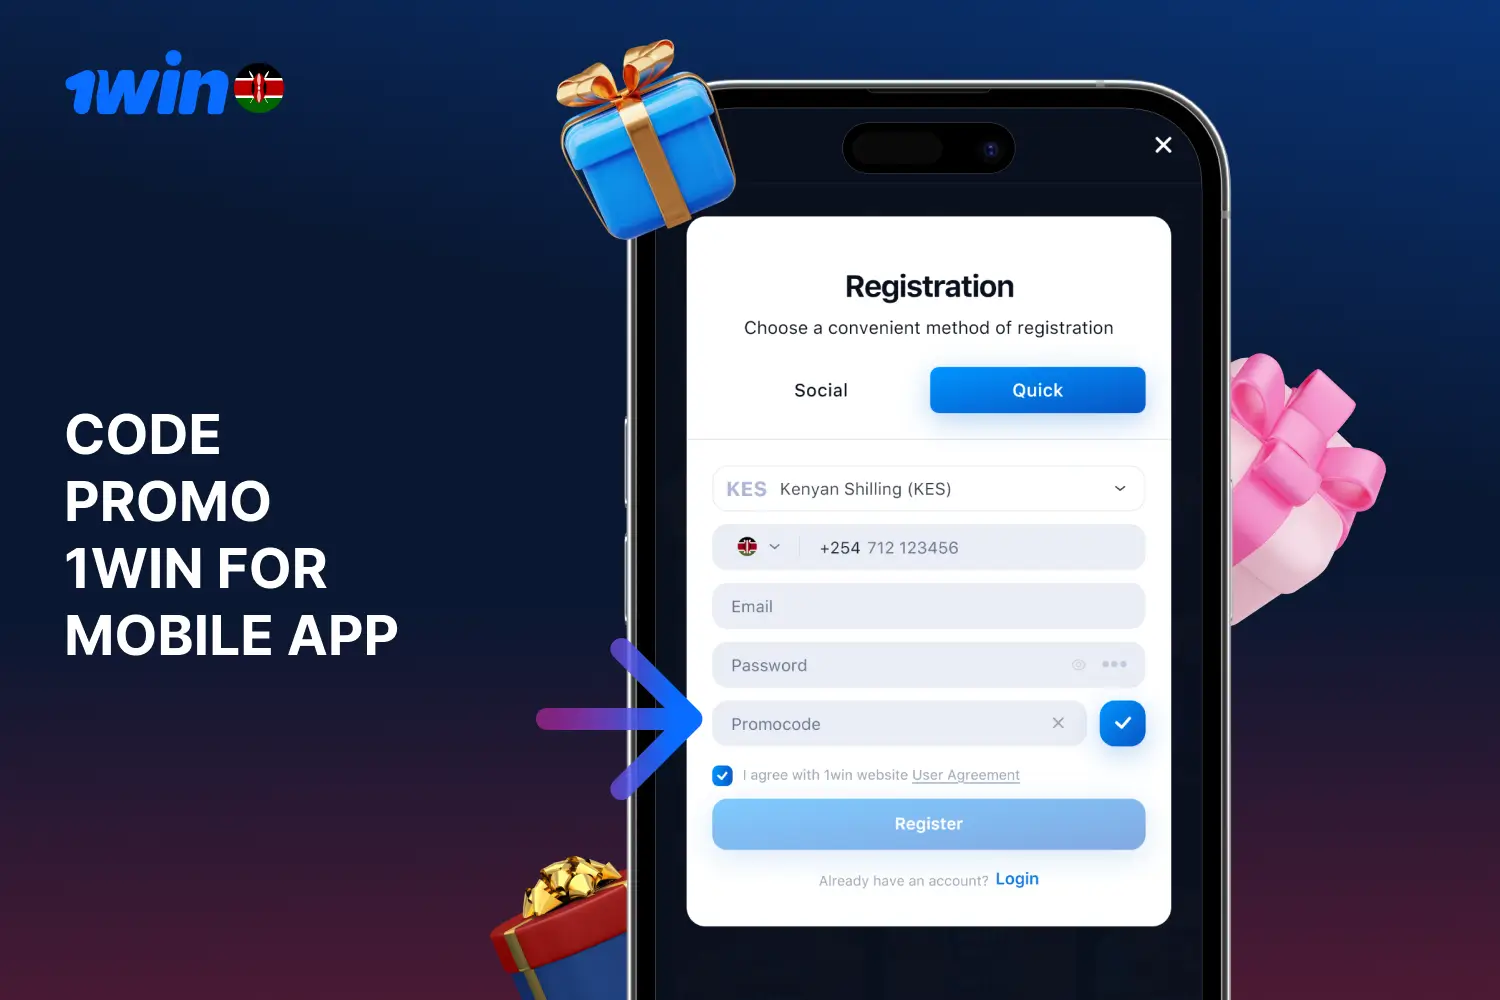 Players from Kenya can use the promo code in the 1win mobile application